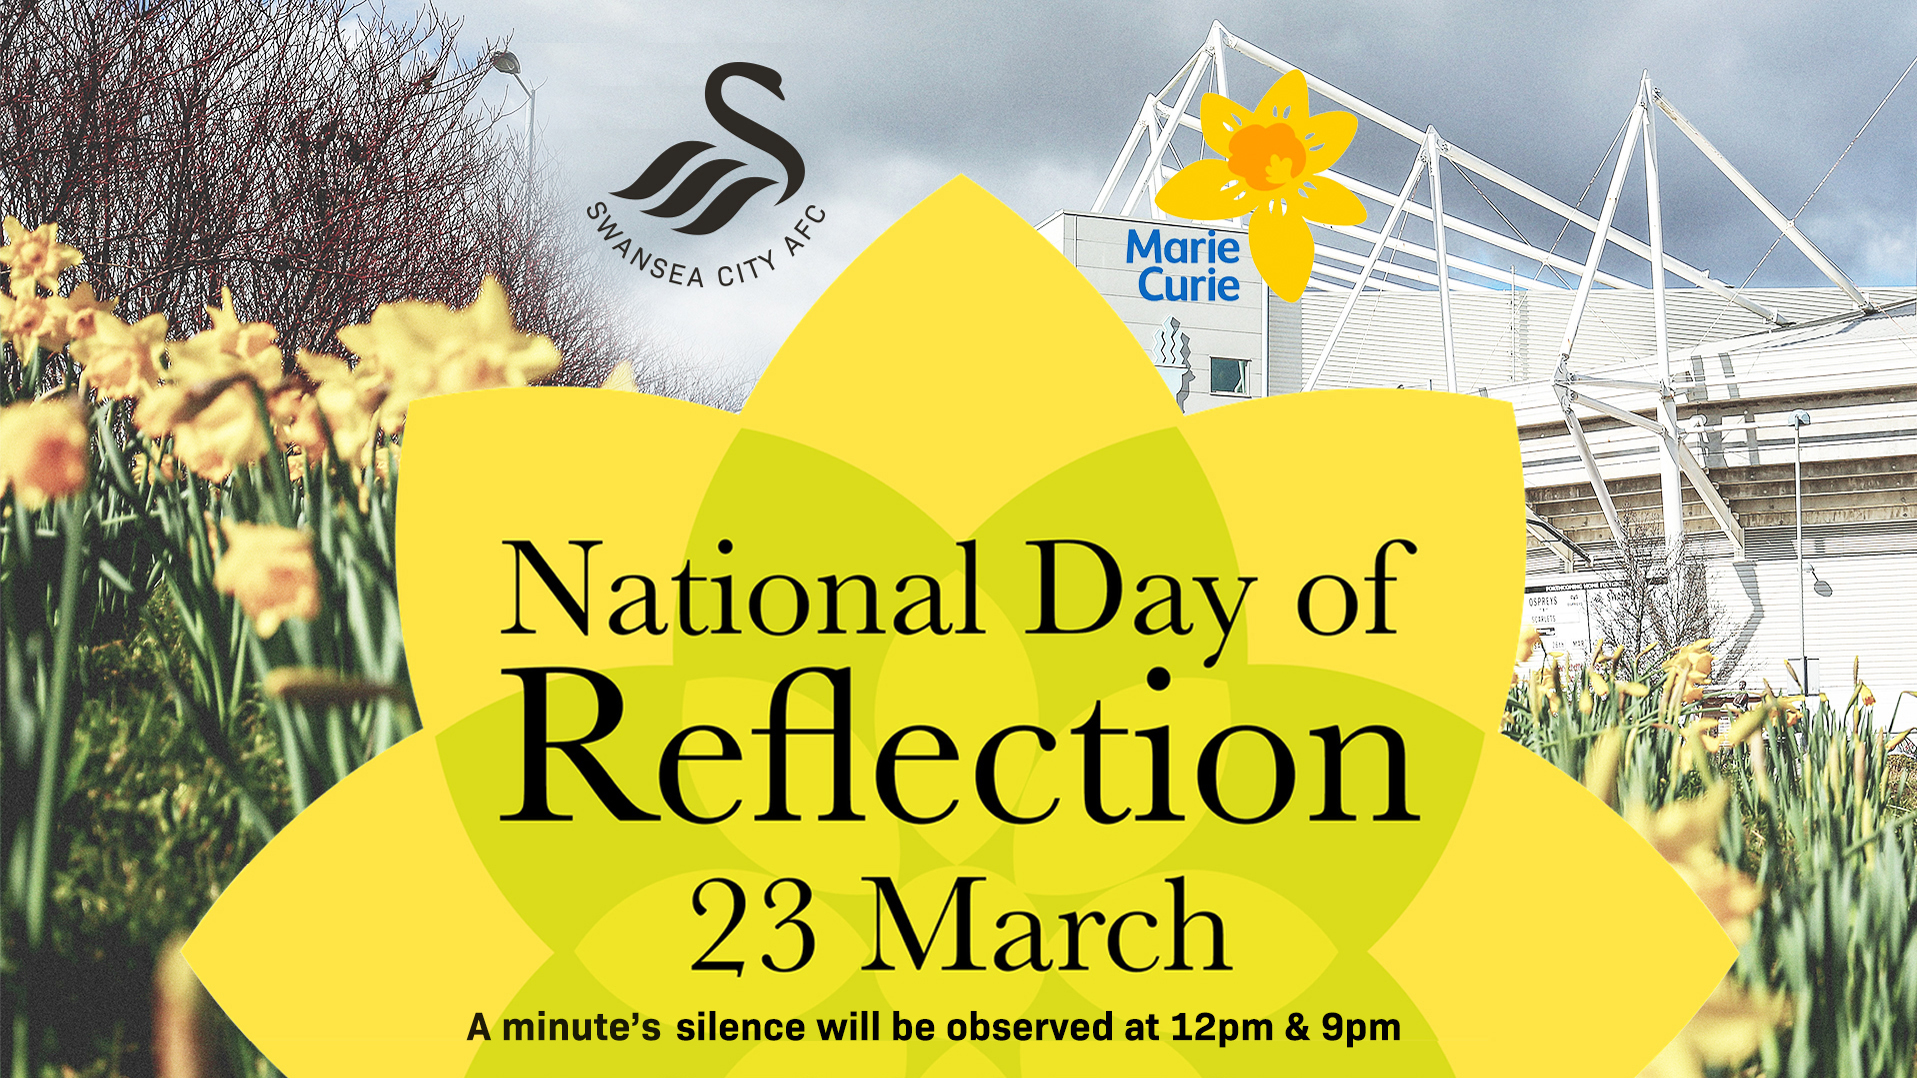 Swansea City show support on National Day of Reflection Swansea